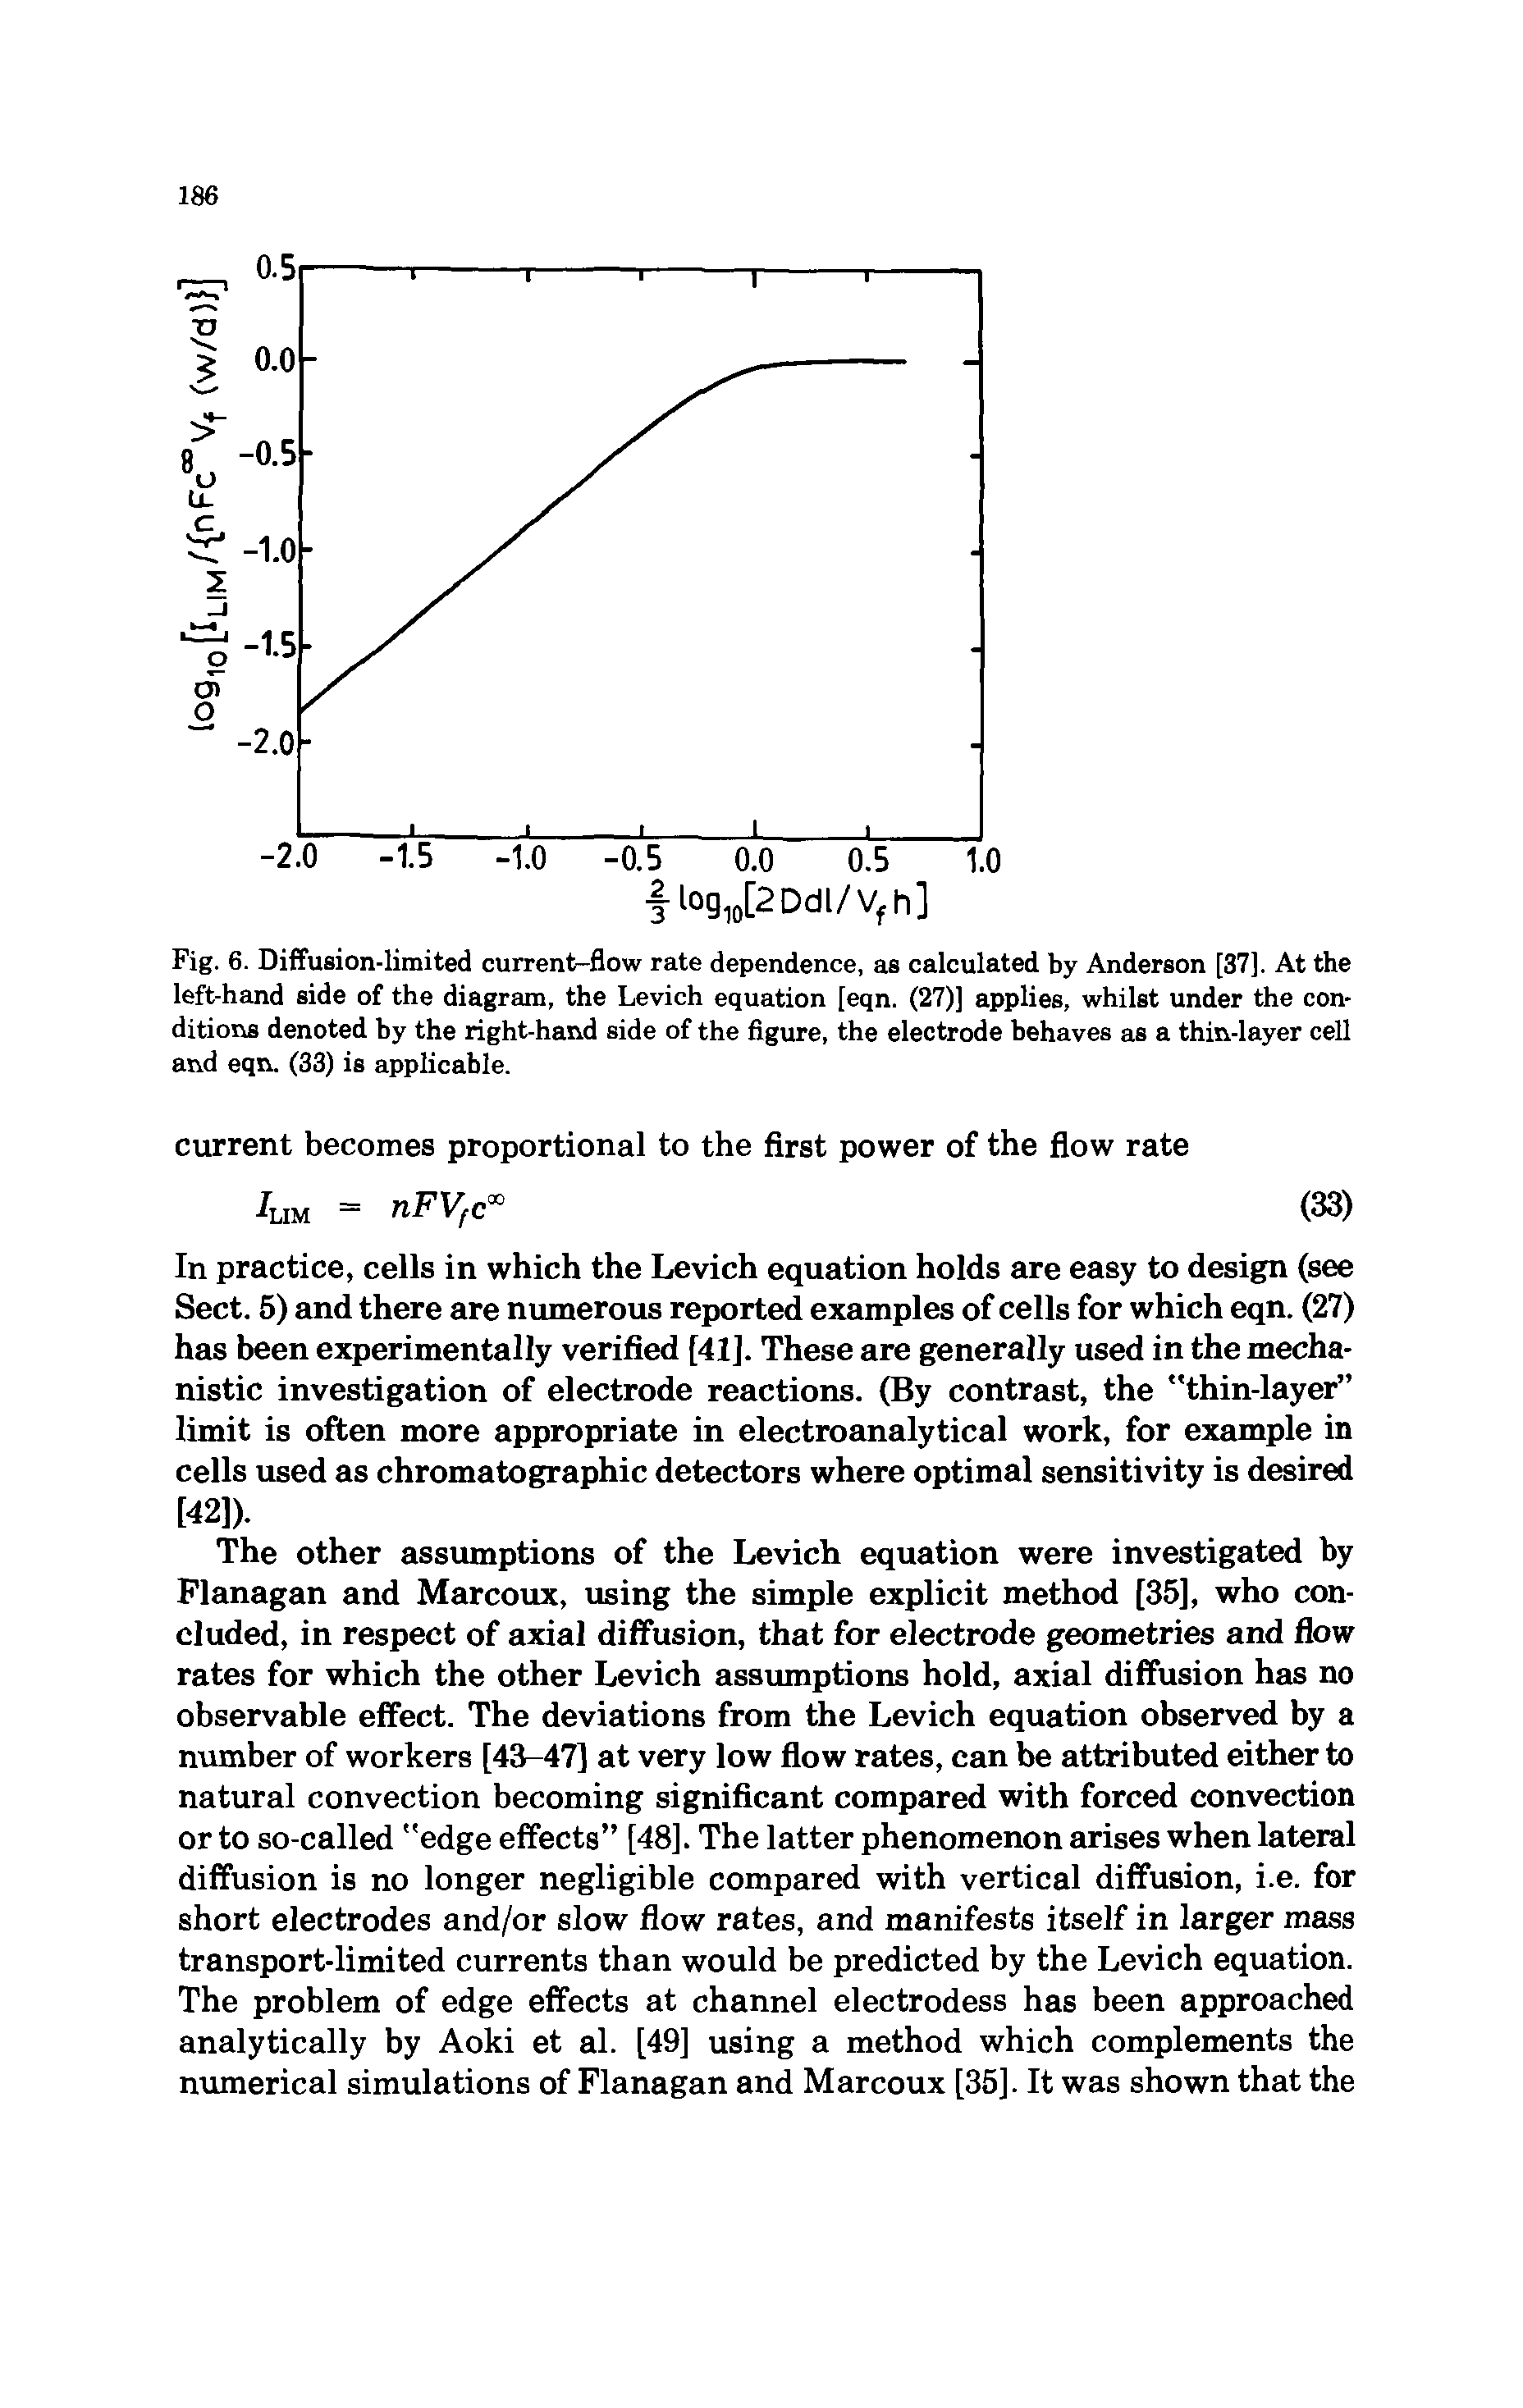 Fig. 6. Diffusion-limited current-flow rate dependence, as calculated by Anderson [37], At the left-hand side of the diagram, the Levich equation [eqn. (27)] applies, whilst under the conditions denoted by the right-hand side of the figure, the electrode behaves as a thin-layer cell and eqn. (33) is applicable.